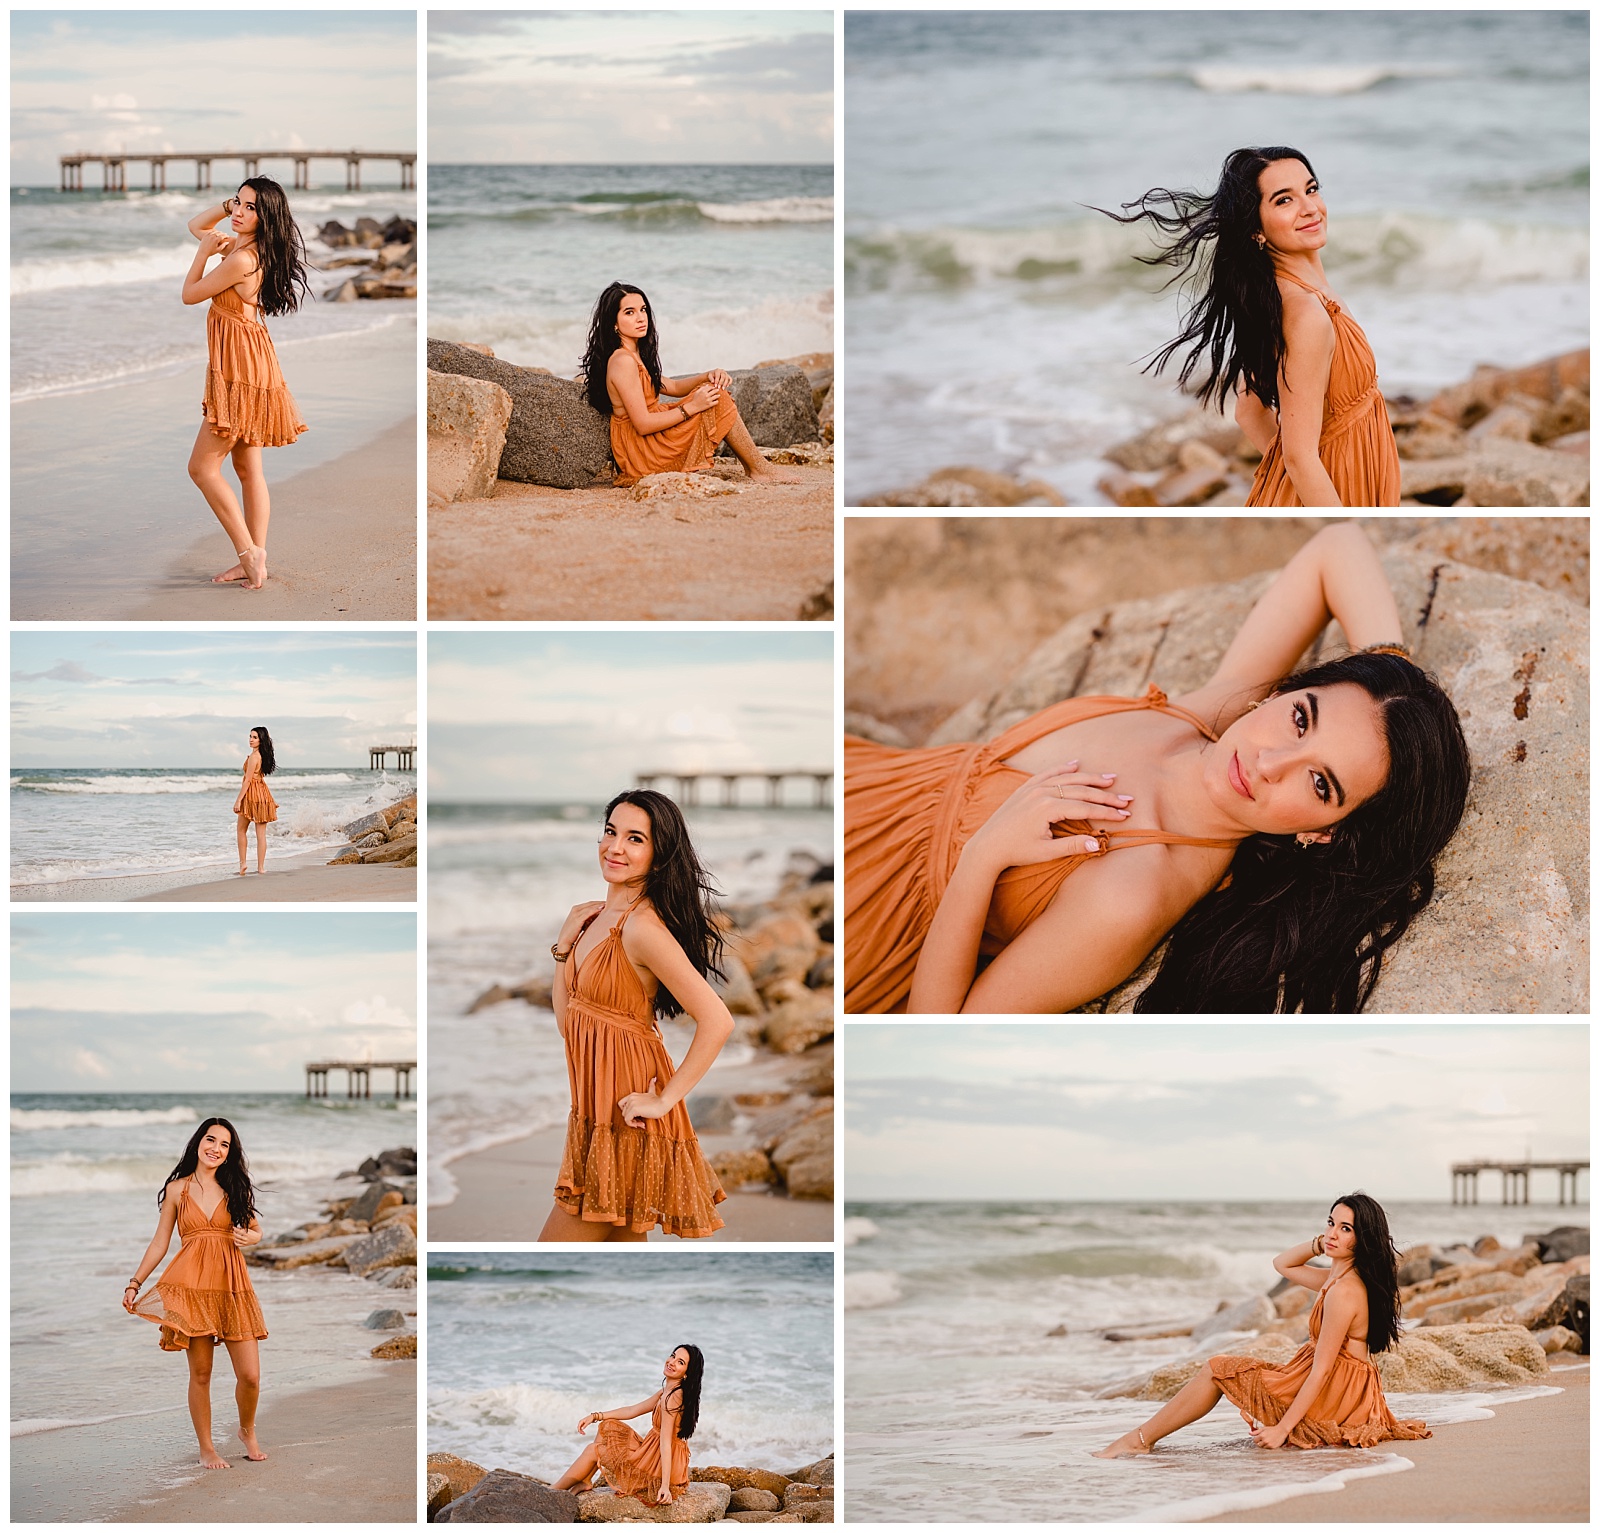 Rocky beach near st augustine florida for senior pictures of girl wearing tan dress.